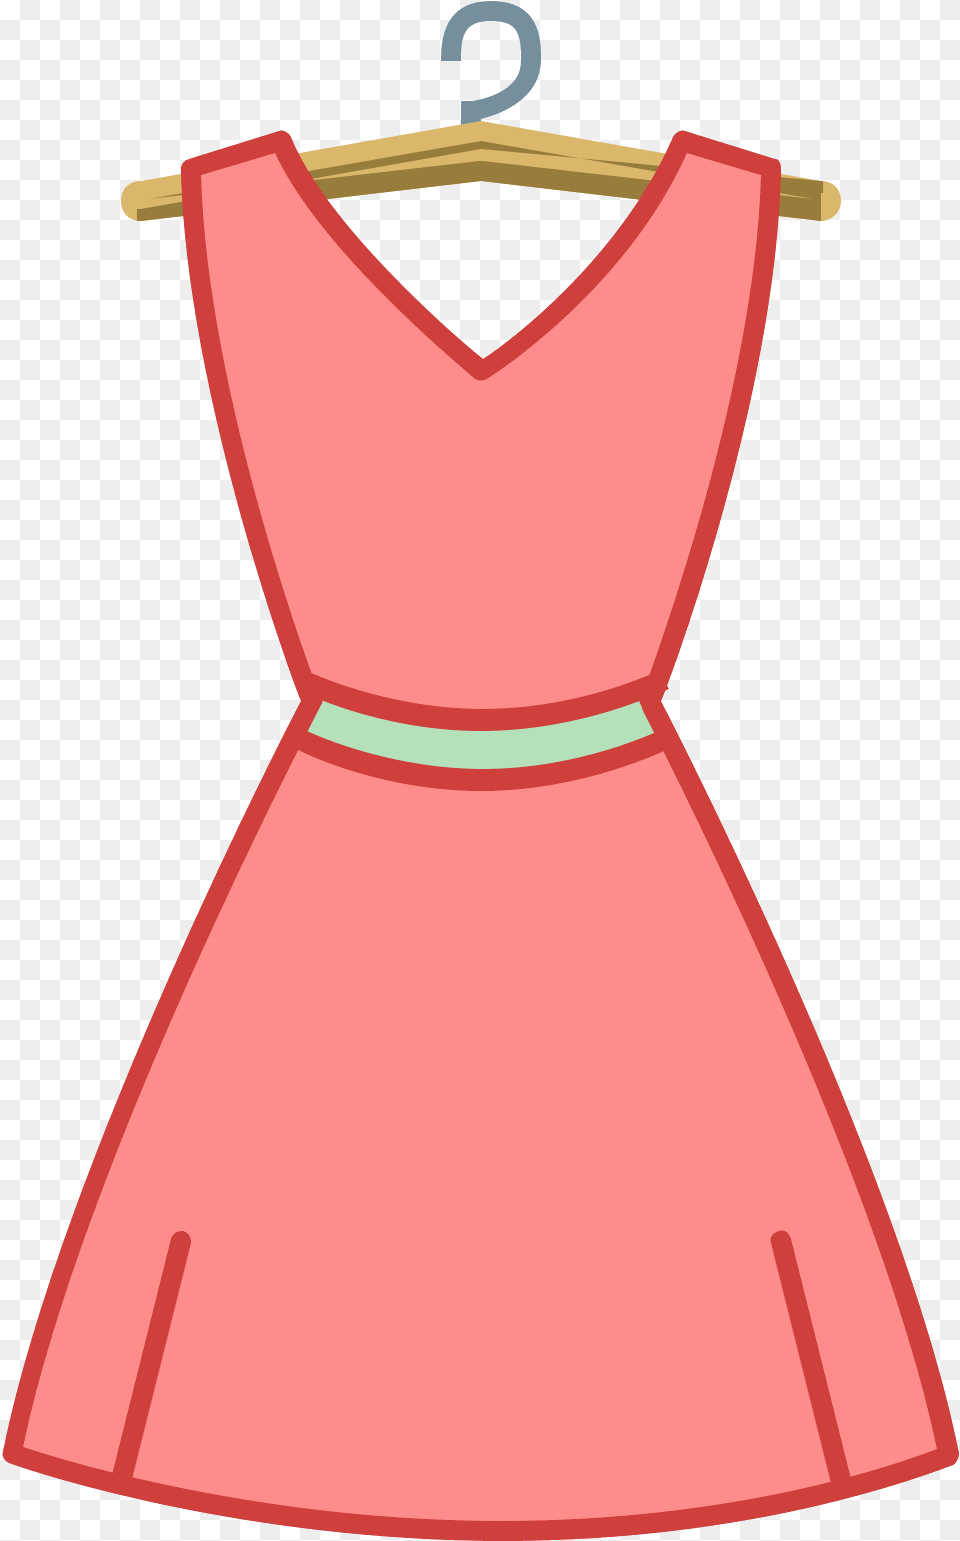 Download And Vector Icon Dress, Clothing, Evening Dress, Formal Wear, Boutique Png Image